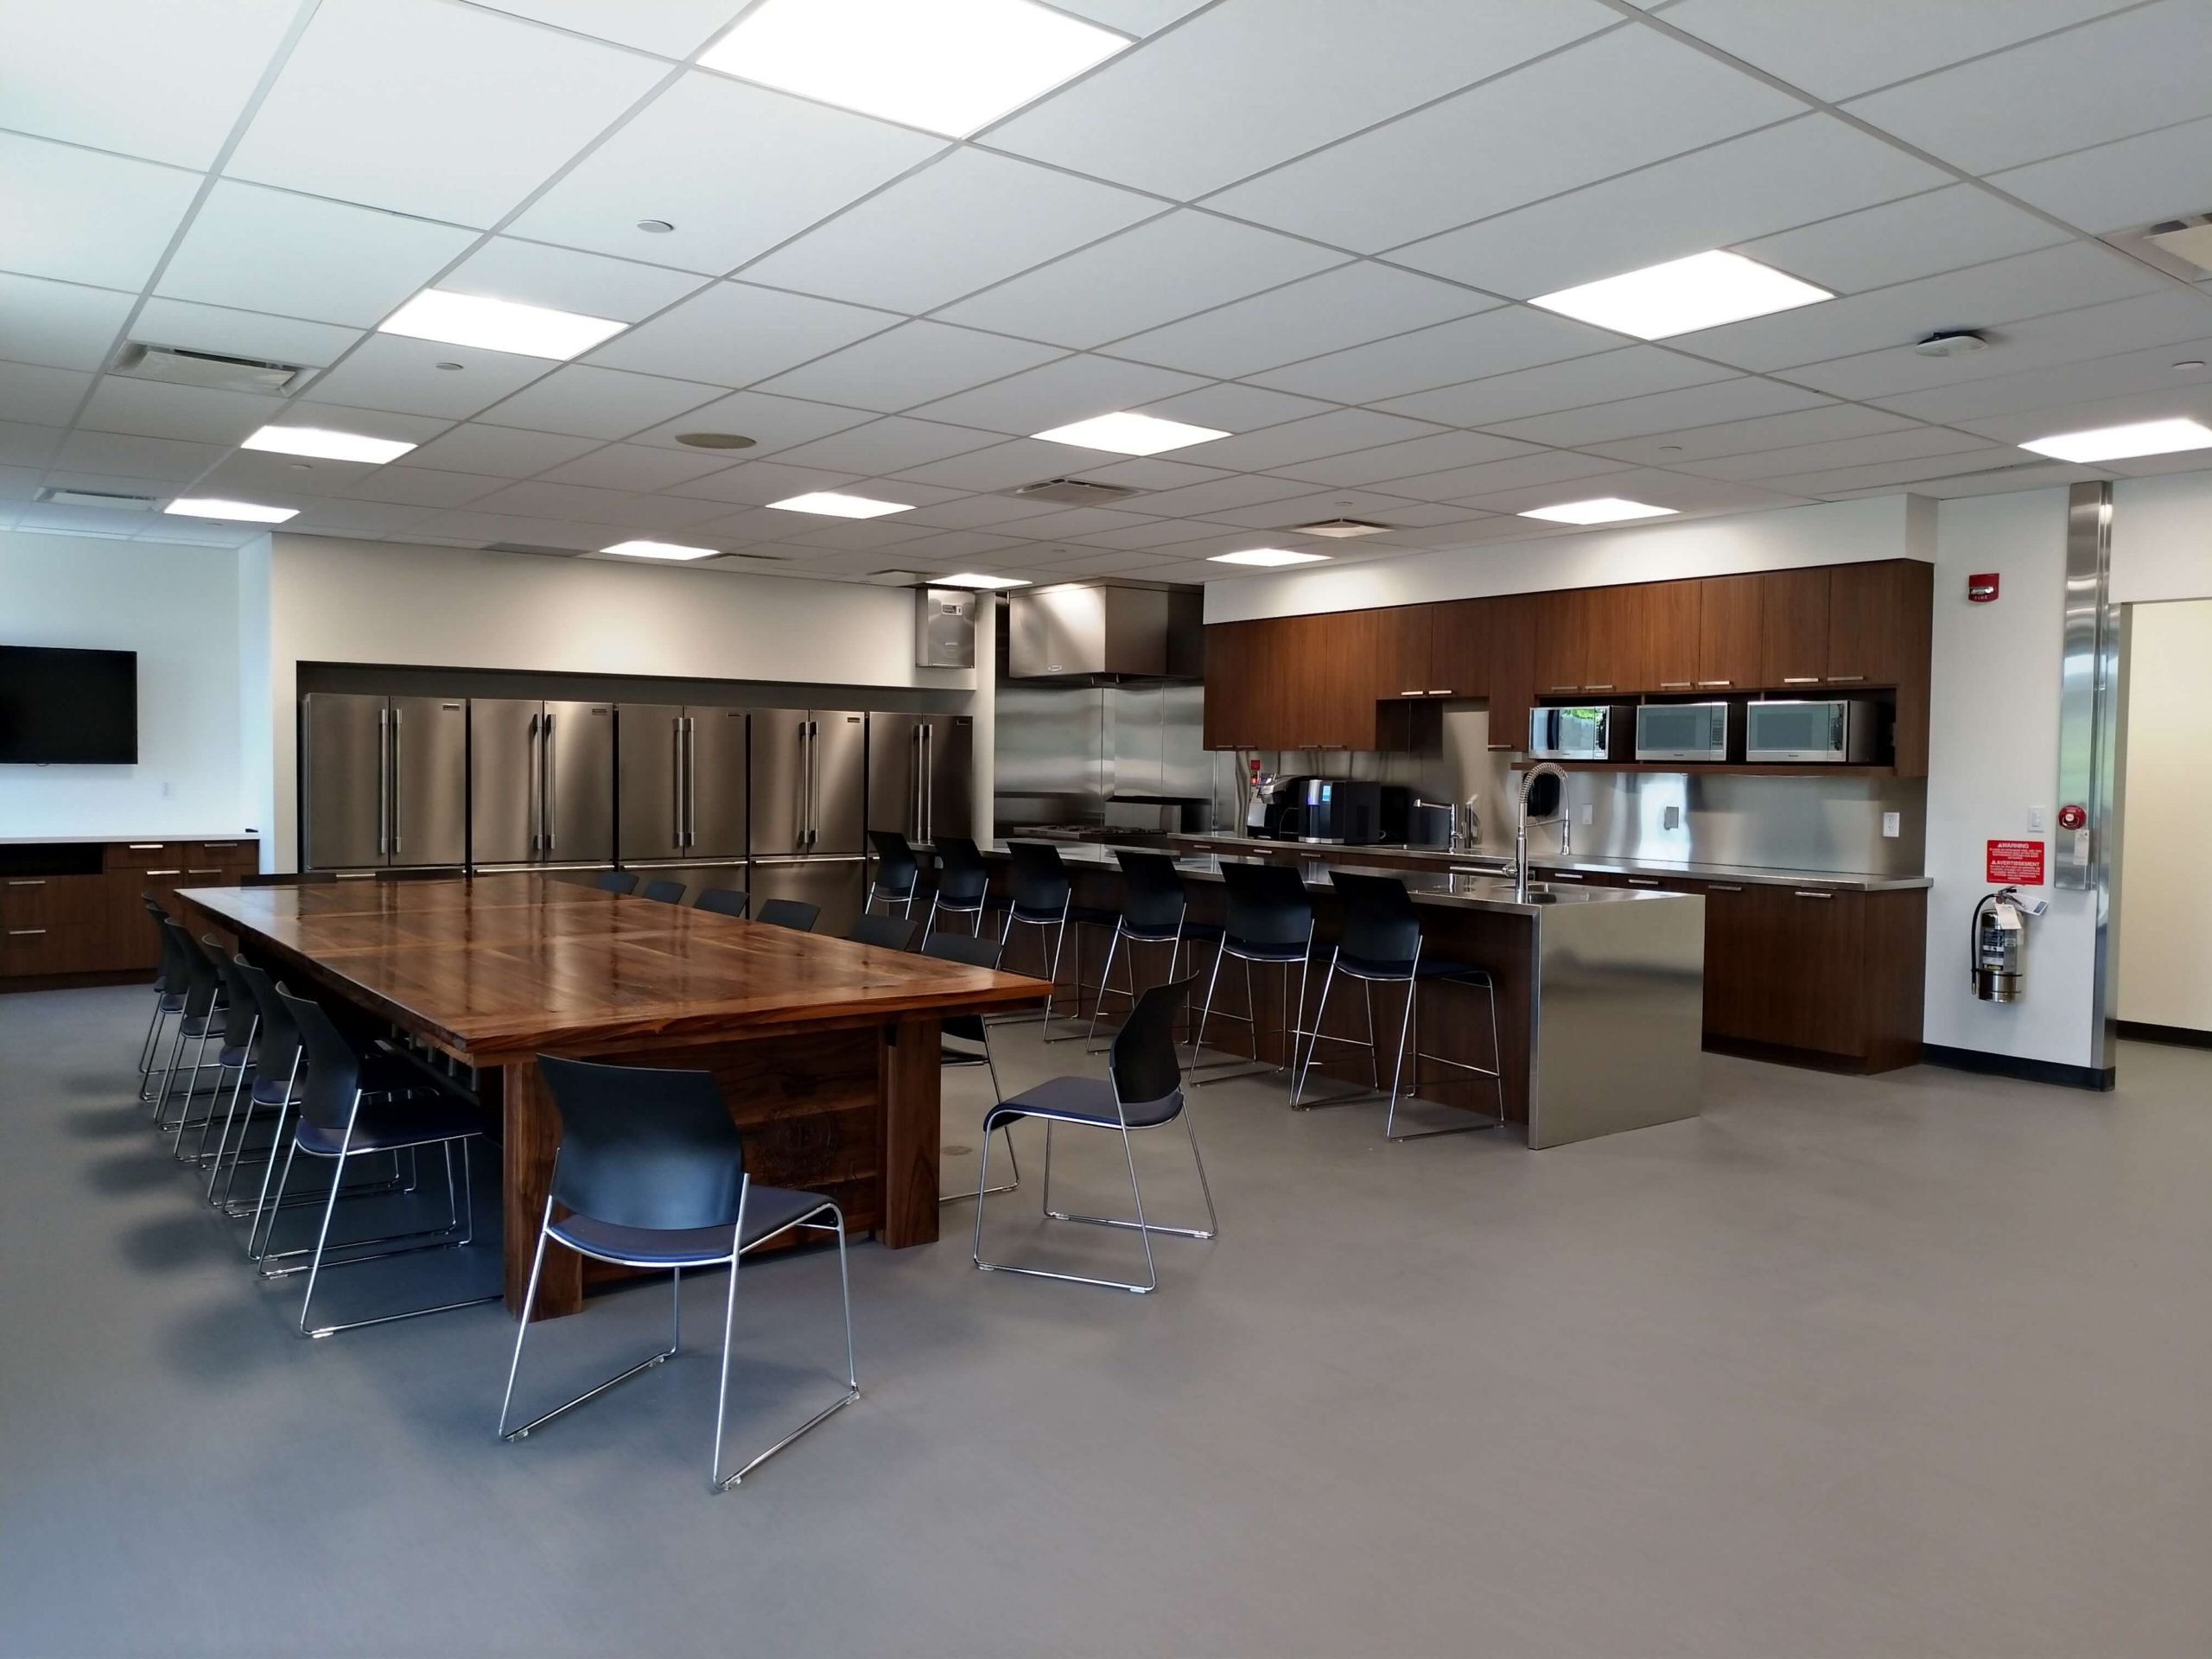 Spruce Grove Protective Services interior kitchen and meeting room